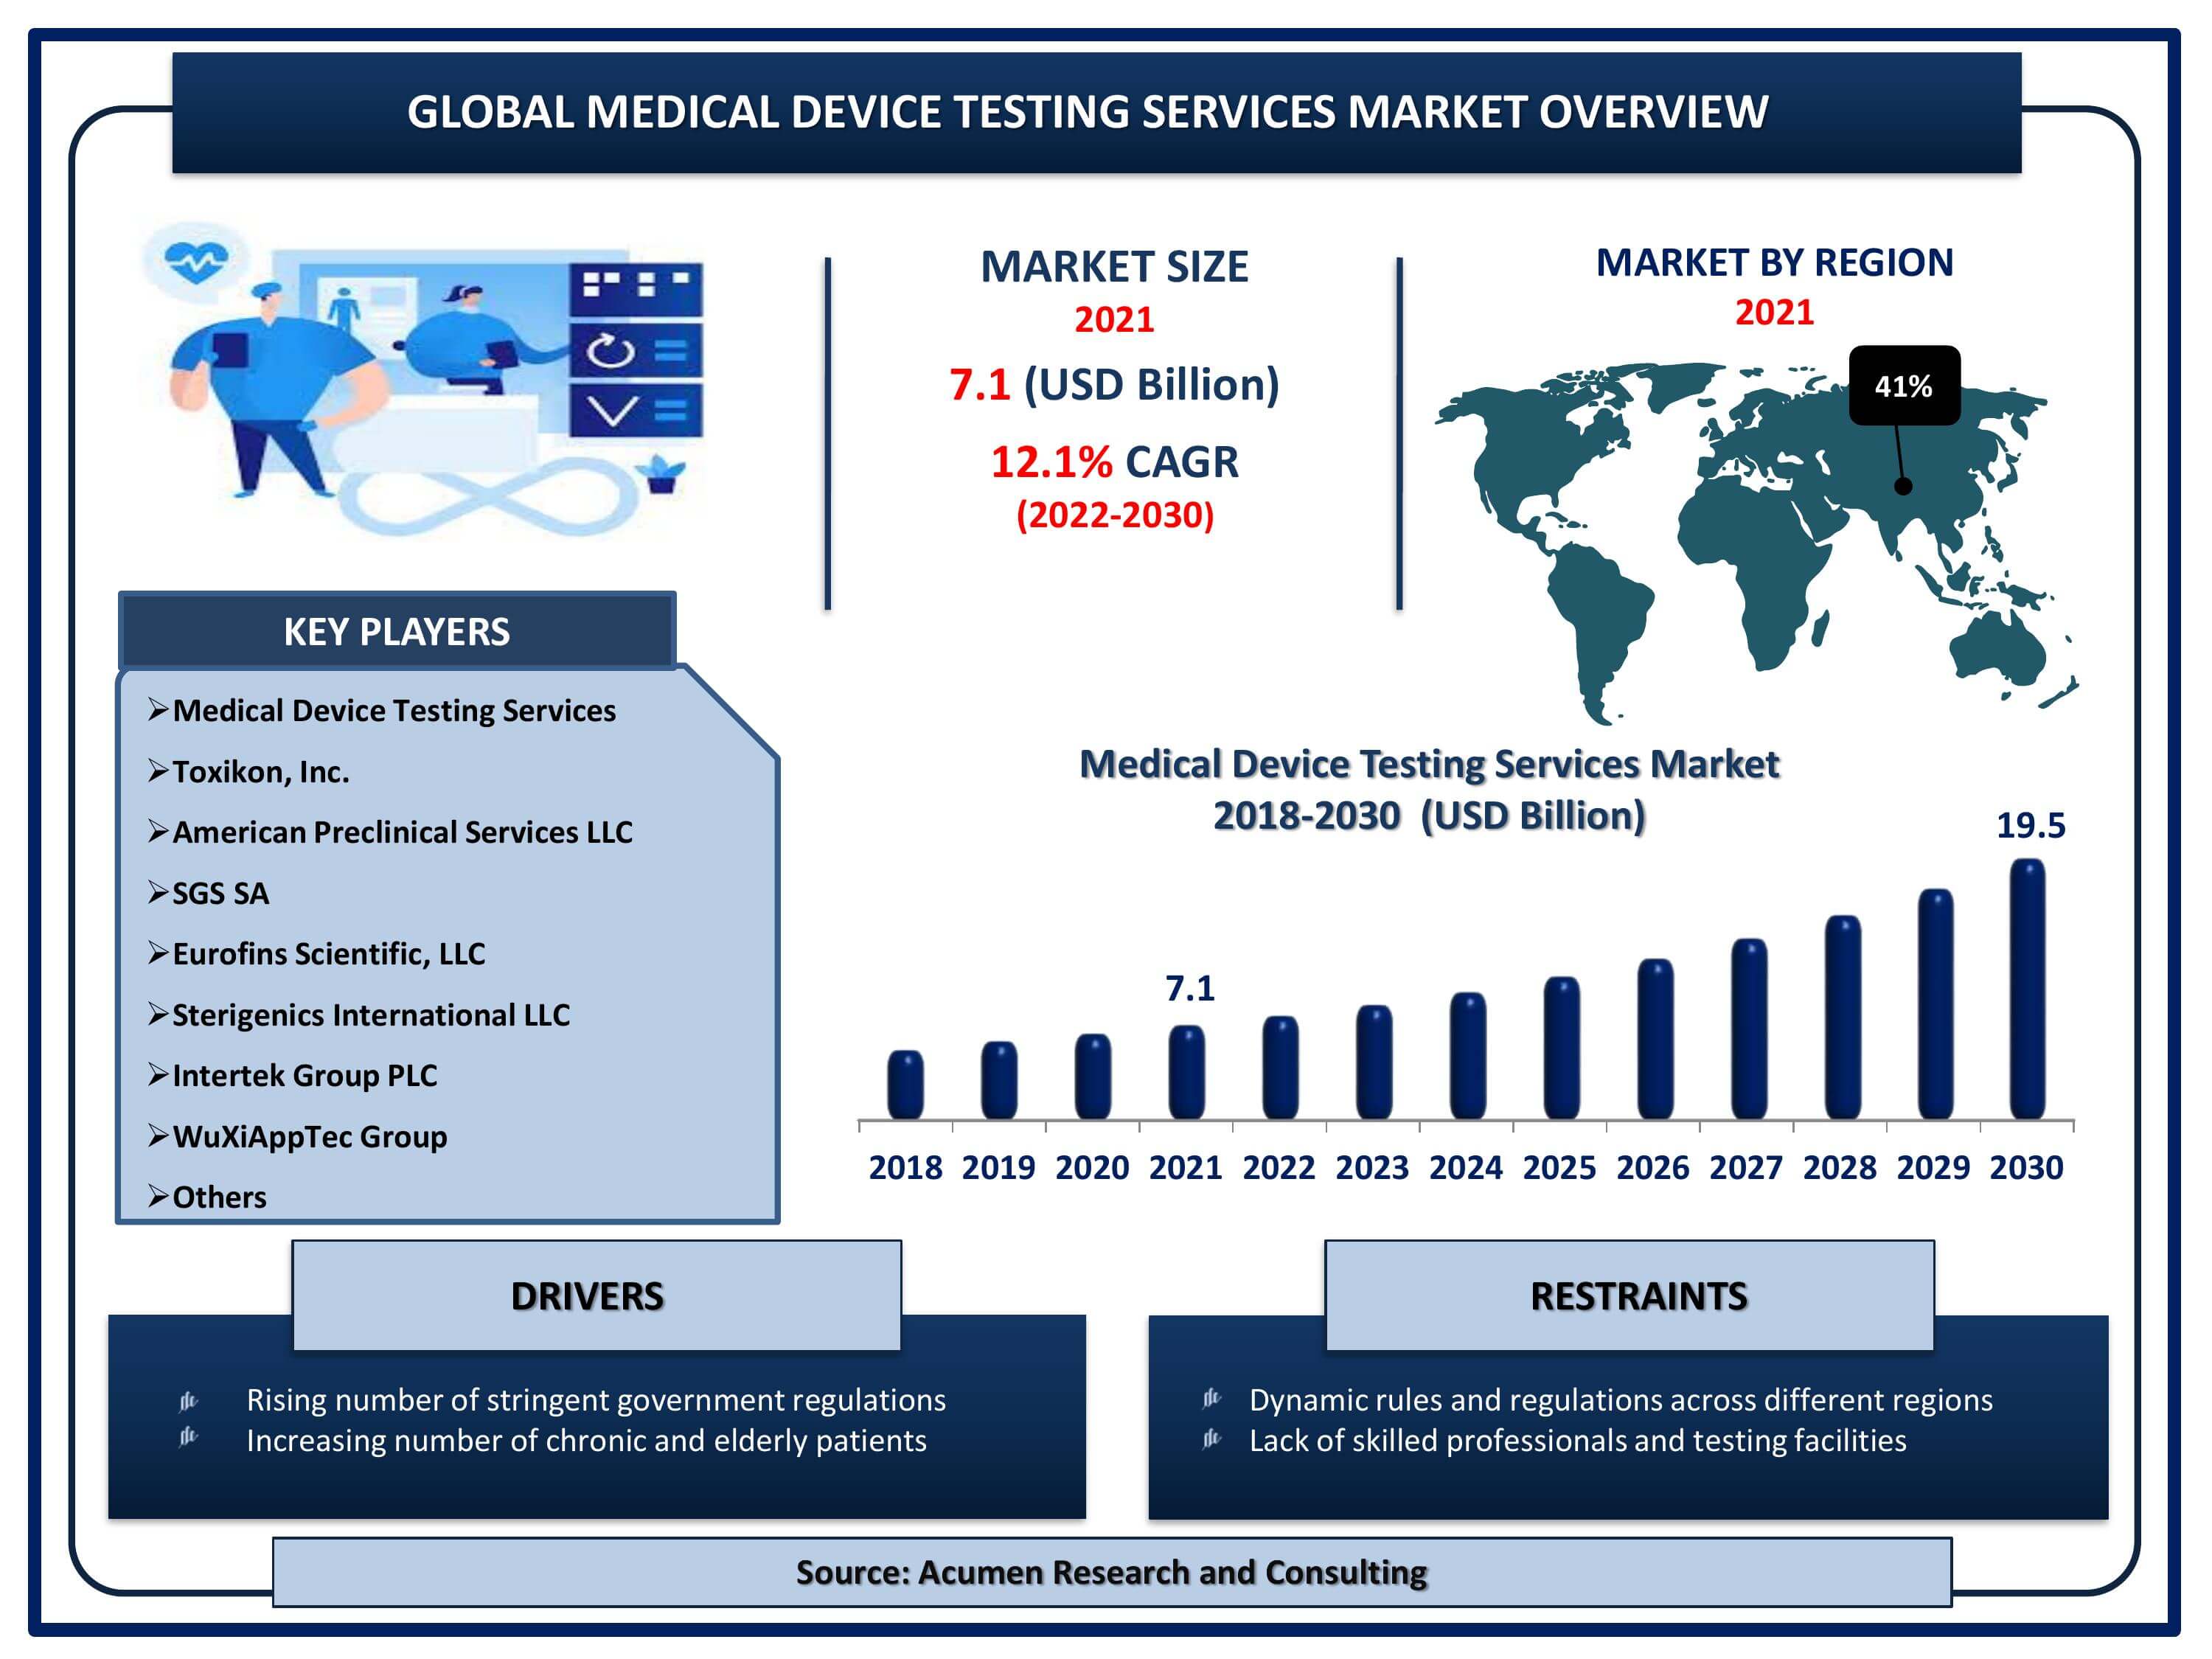 Global medical device testing services market revenue is estimated to reach USD 19.5 Billion by 2030 with a CAGR of 12.1% from 2022 to 2030